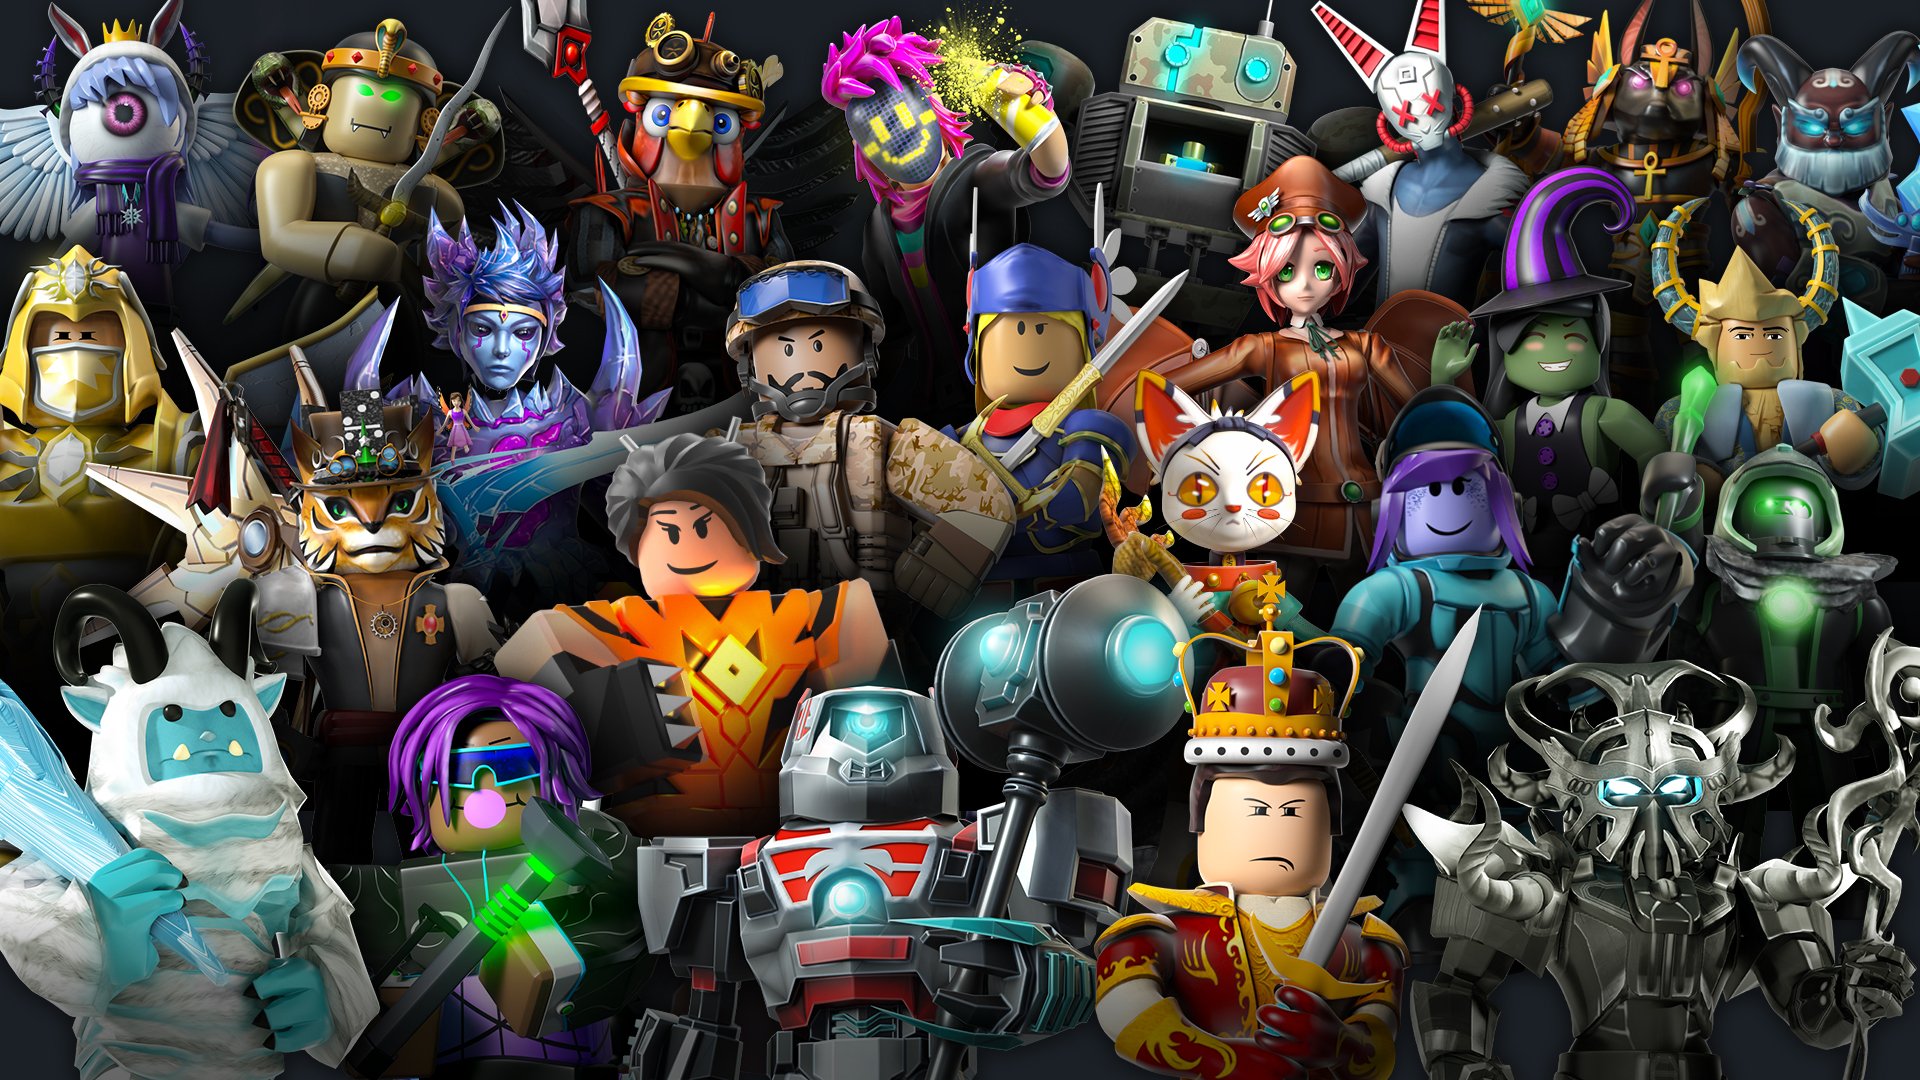 Bloxy News IN: Has Acquired The Company In Efforts To Help Bring Facial Expressions Animations And More Realistic 3D Avatars To The #Roblox Platform. More